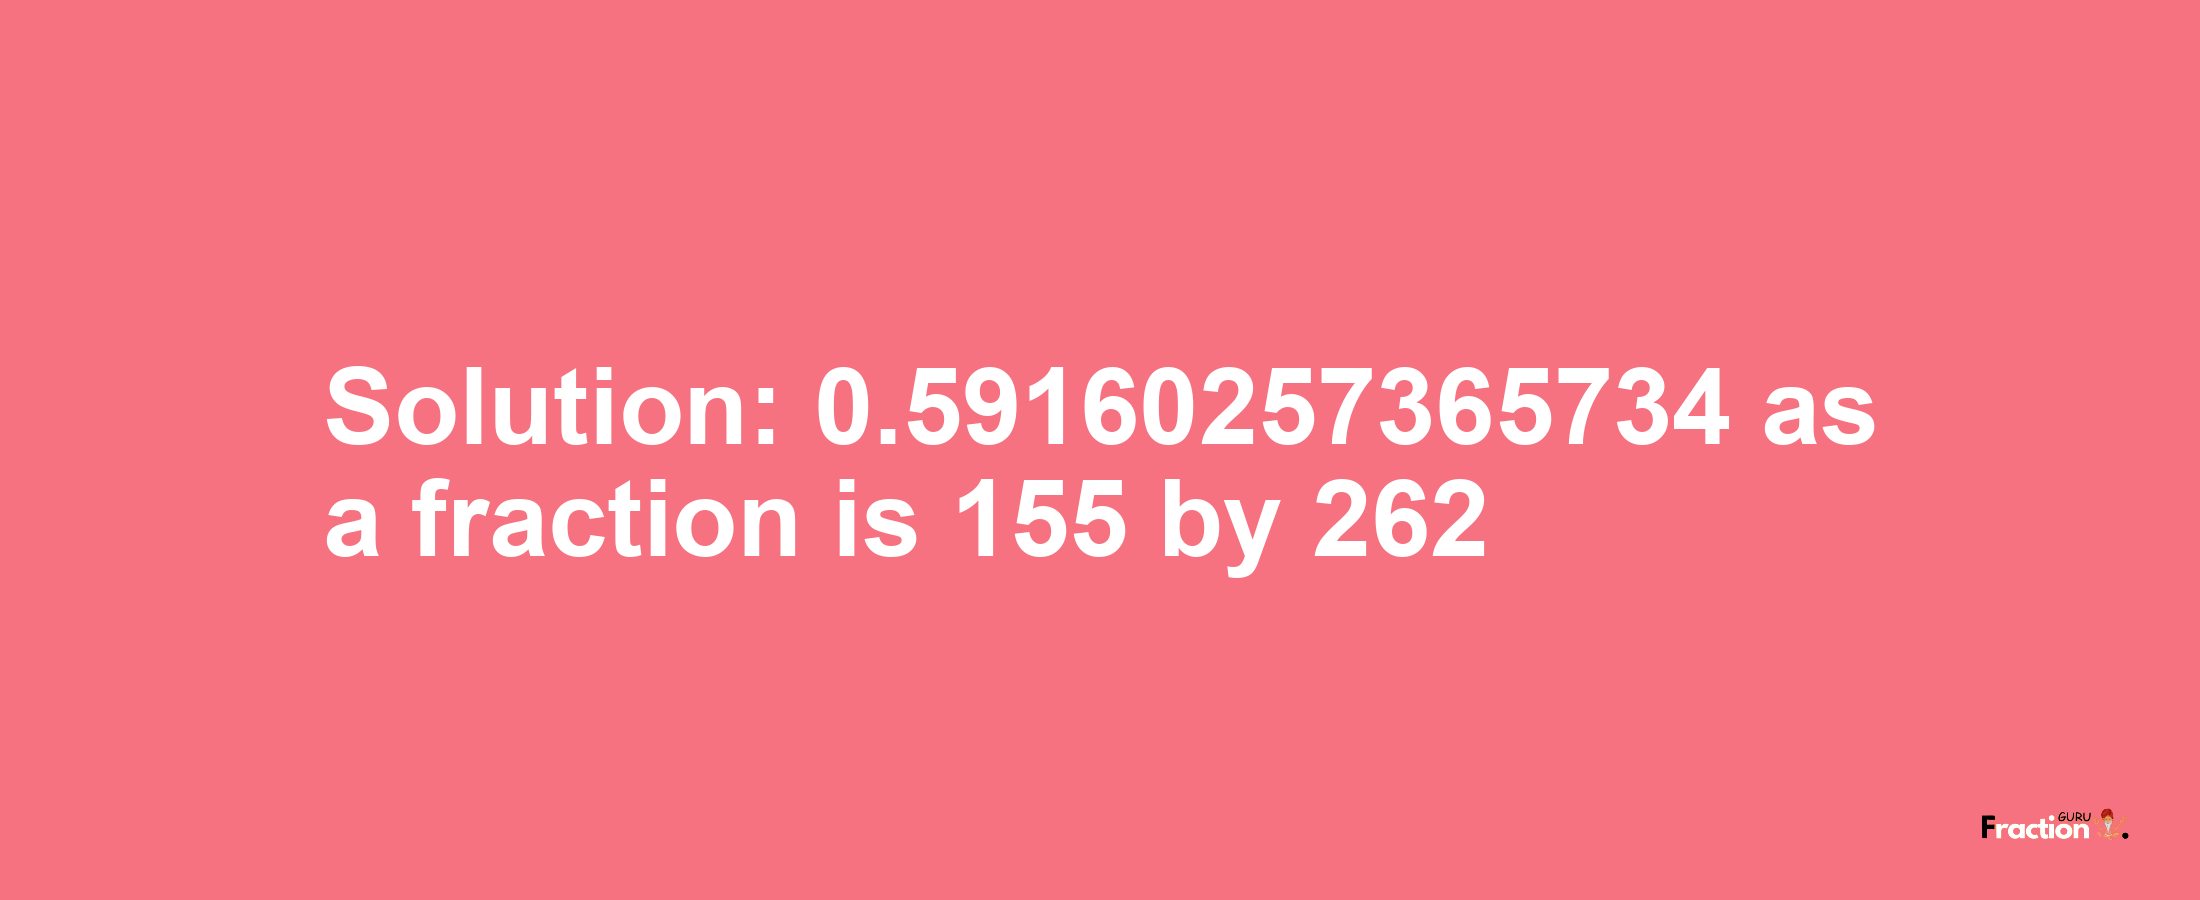 Solution:0.59160257365734 as a fraction is 155/262